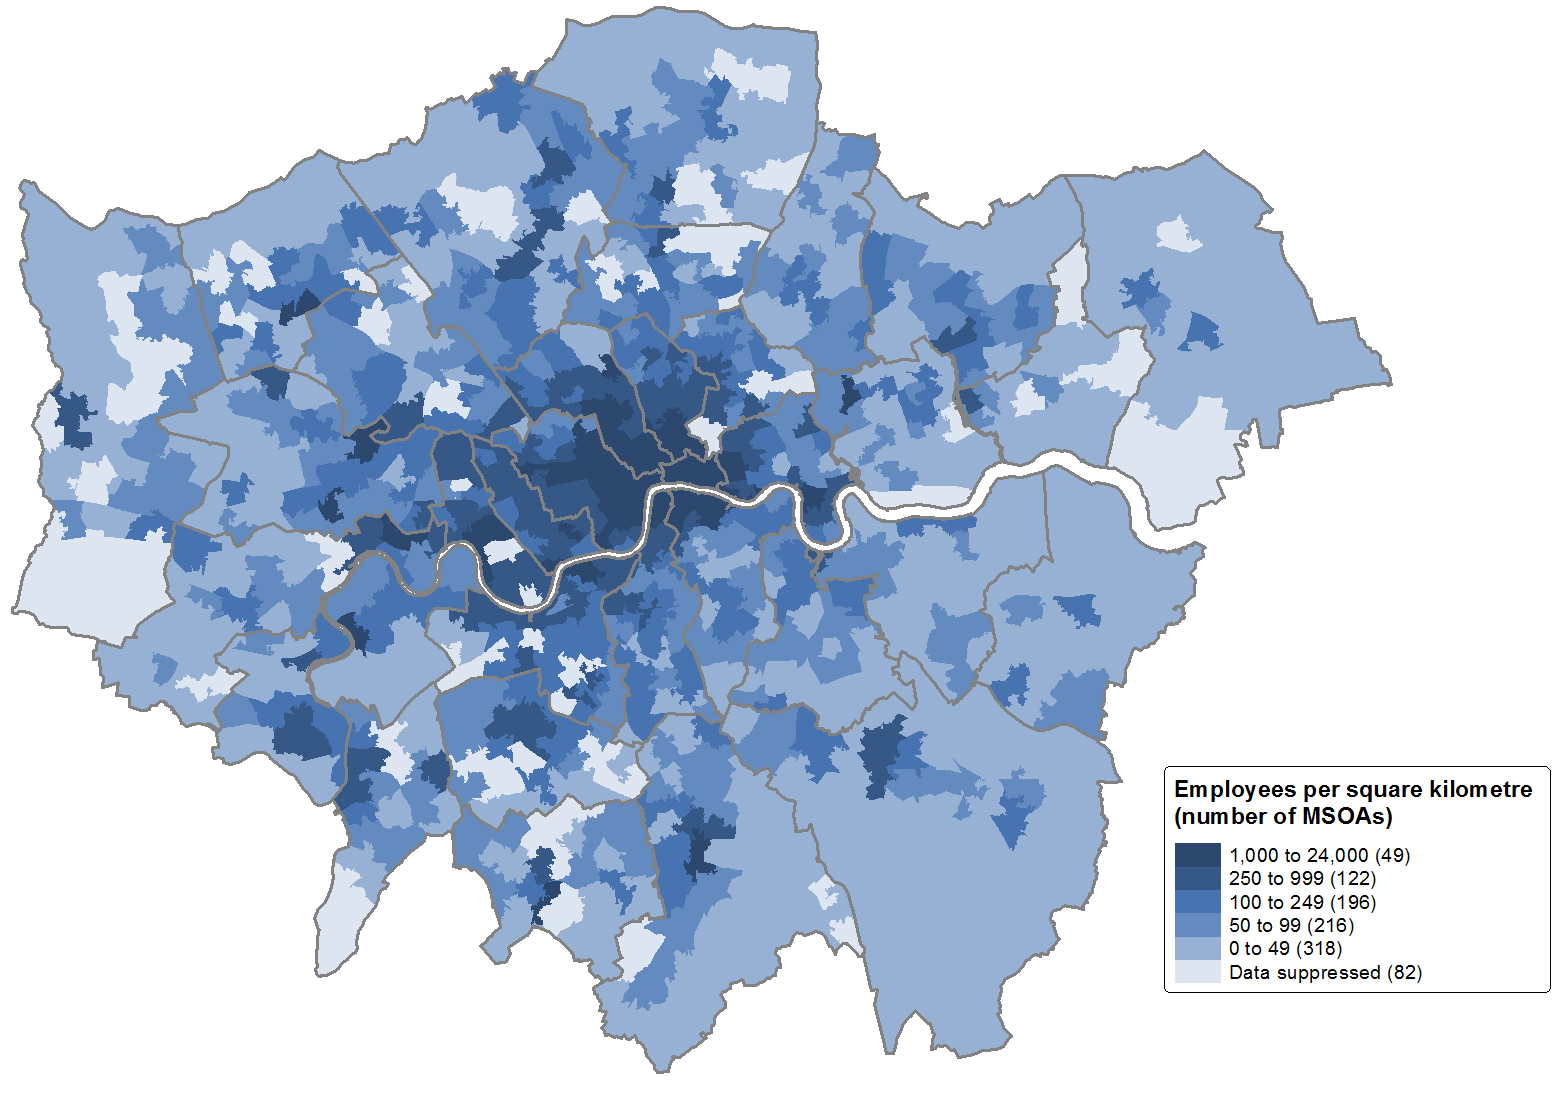 Professional, Scientific and Technical Activities, excluding head offices and management consultancies, are clustered around central London with dispersed pockets of jobs in, for example, Harrow, Croydon and Richmond upon Thames